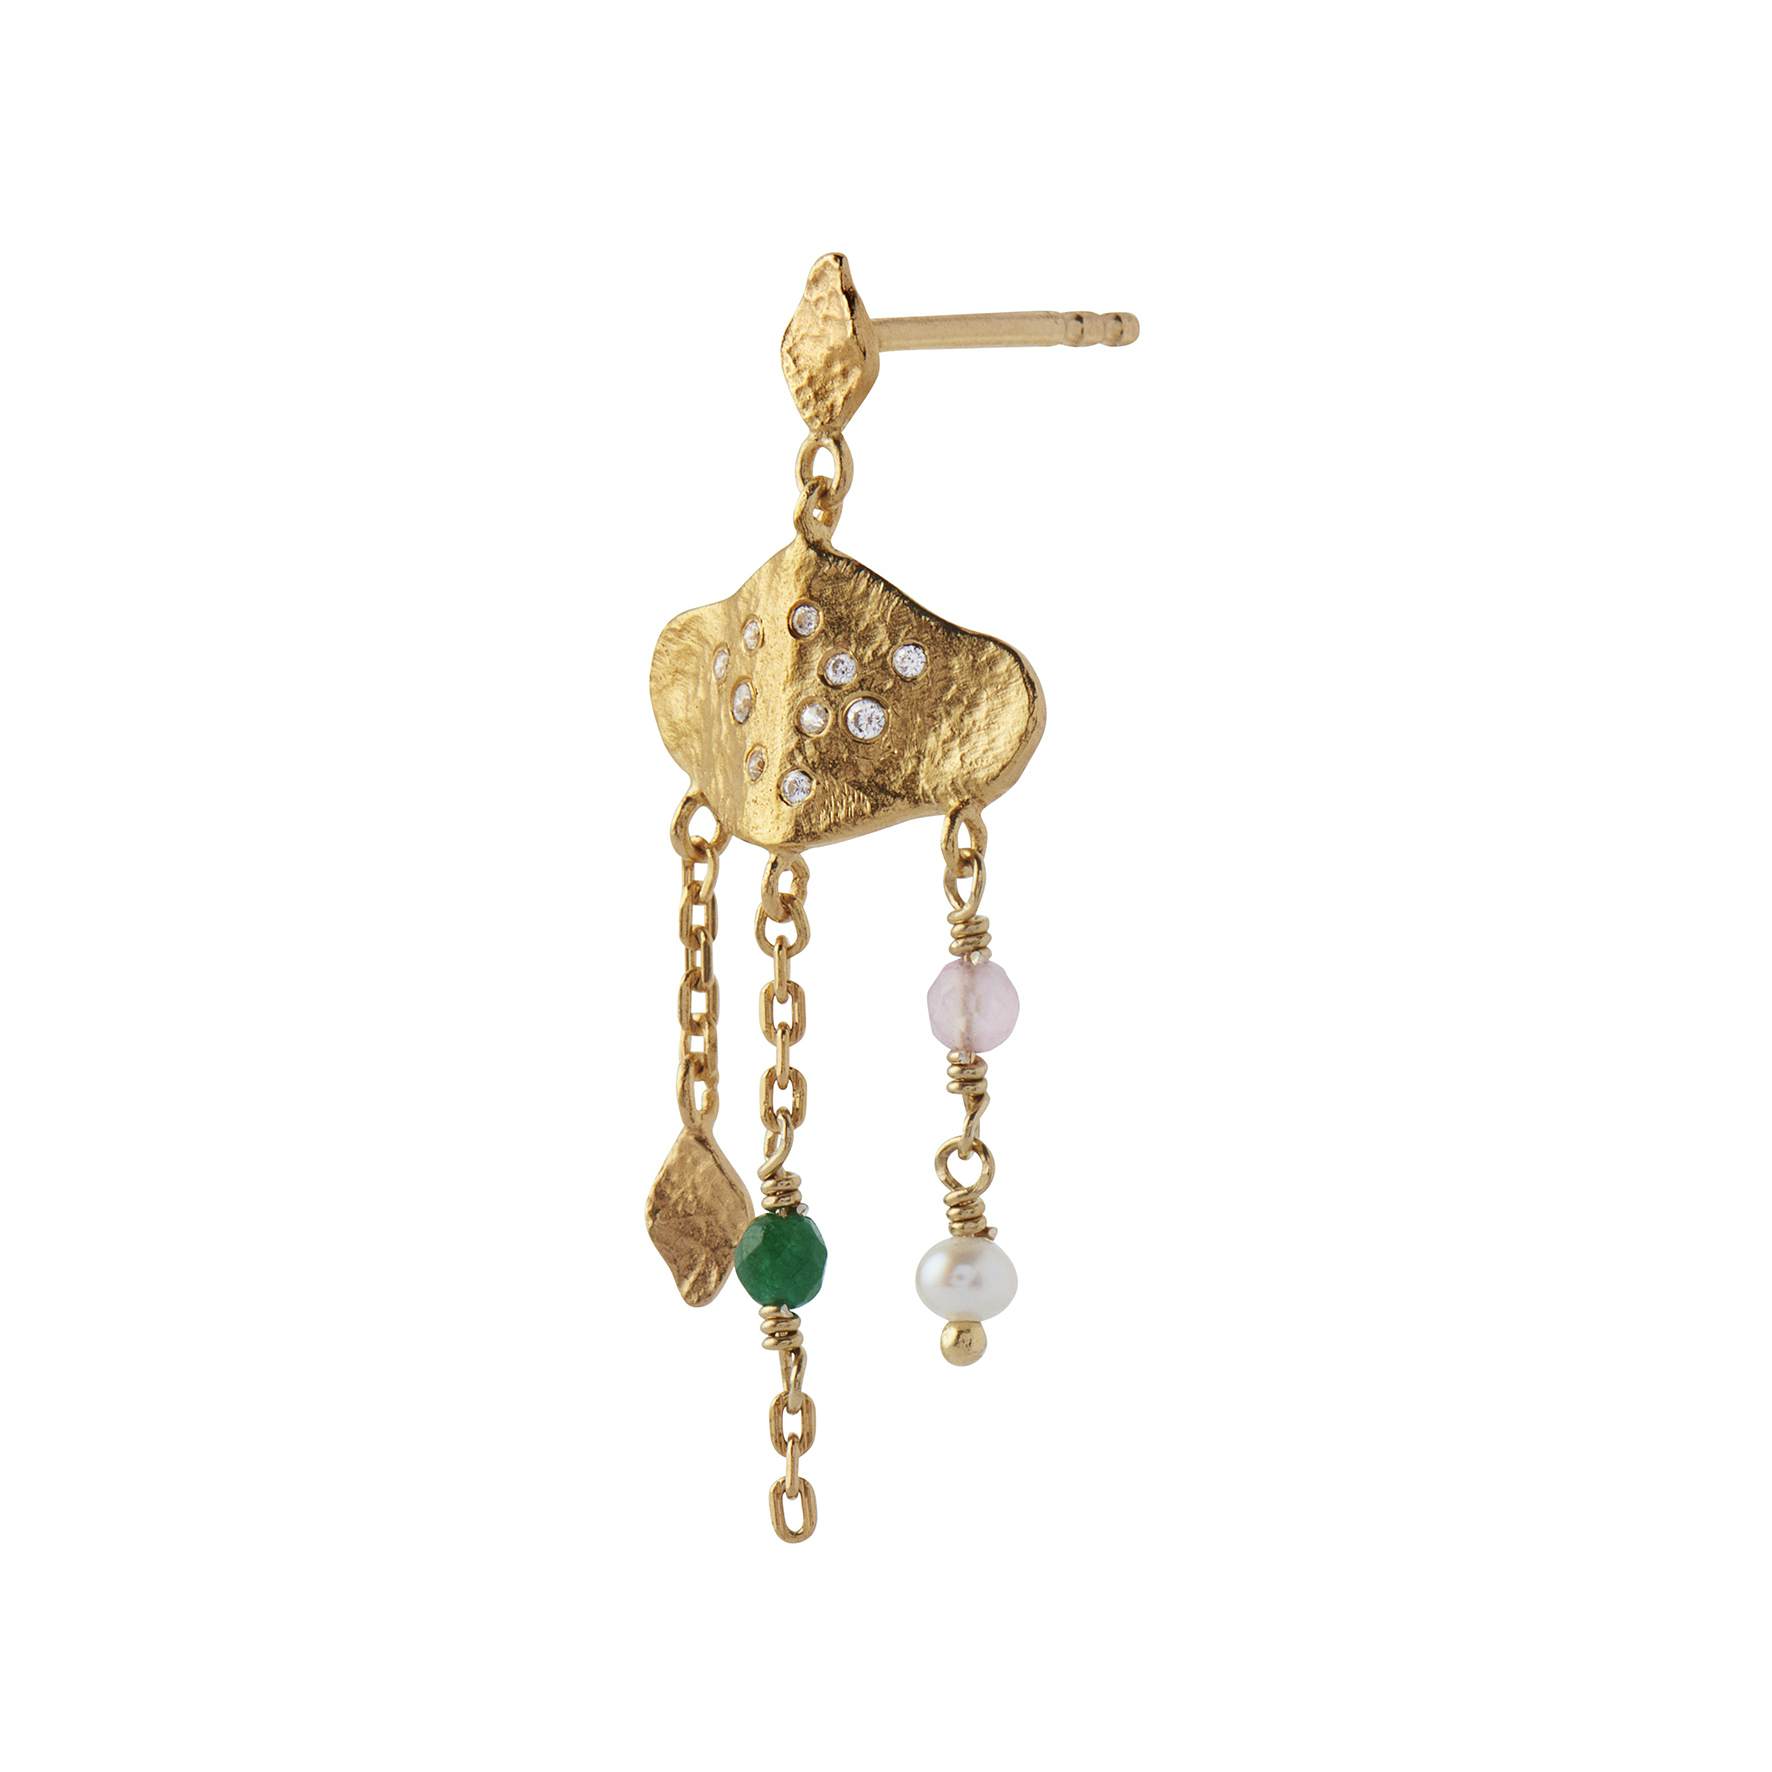 Ile De L'amour With Dancing Stones Earring von STINE A Jewelry in Vergoldet-Silber Sterling 925